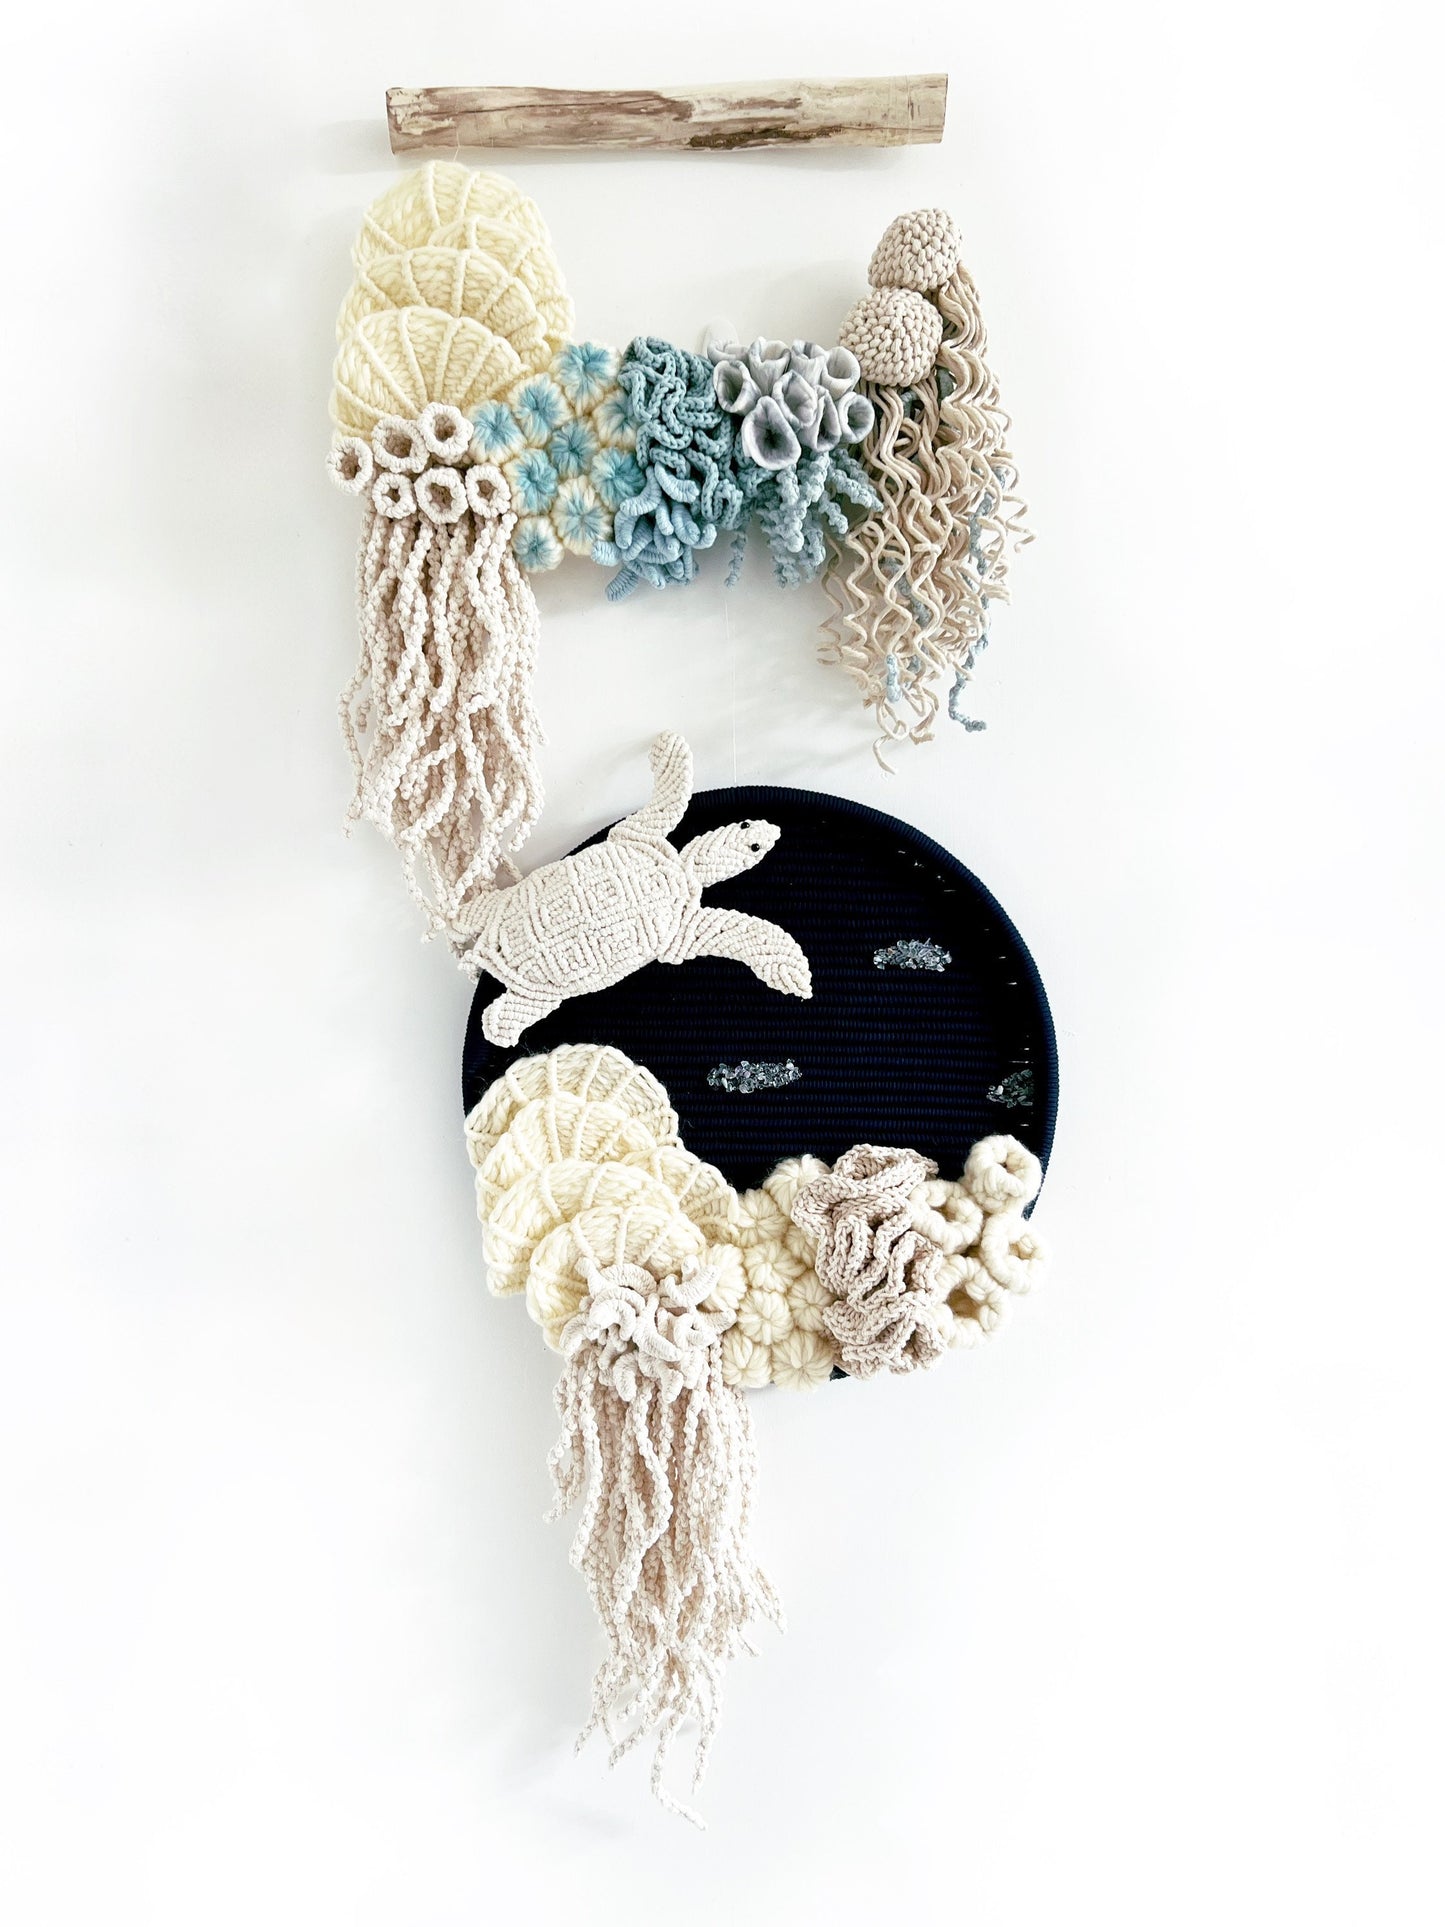 Commission Order for Hollie Urbeck /Ocean wall Decor/Coral Reef Wall Art/ Turtle Art/macrame Art/